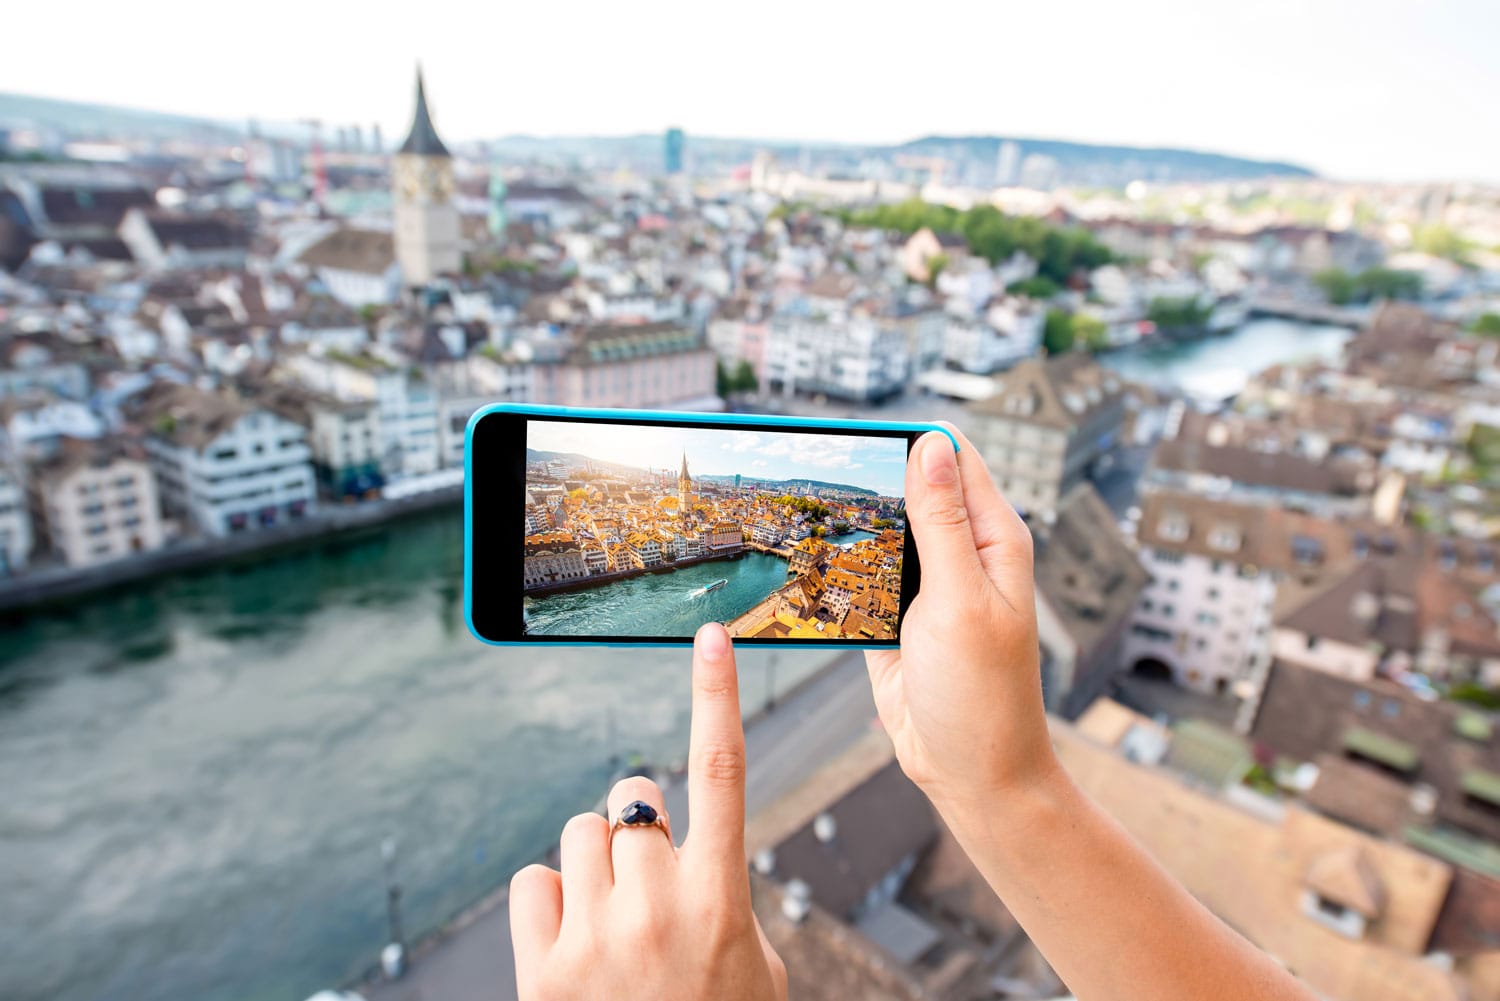 Photographing with smart phone aerial view on Zurich old town in Switzerland